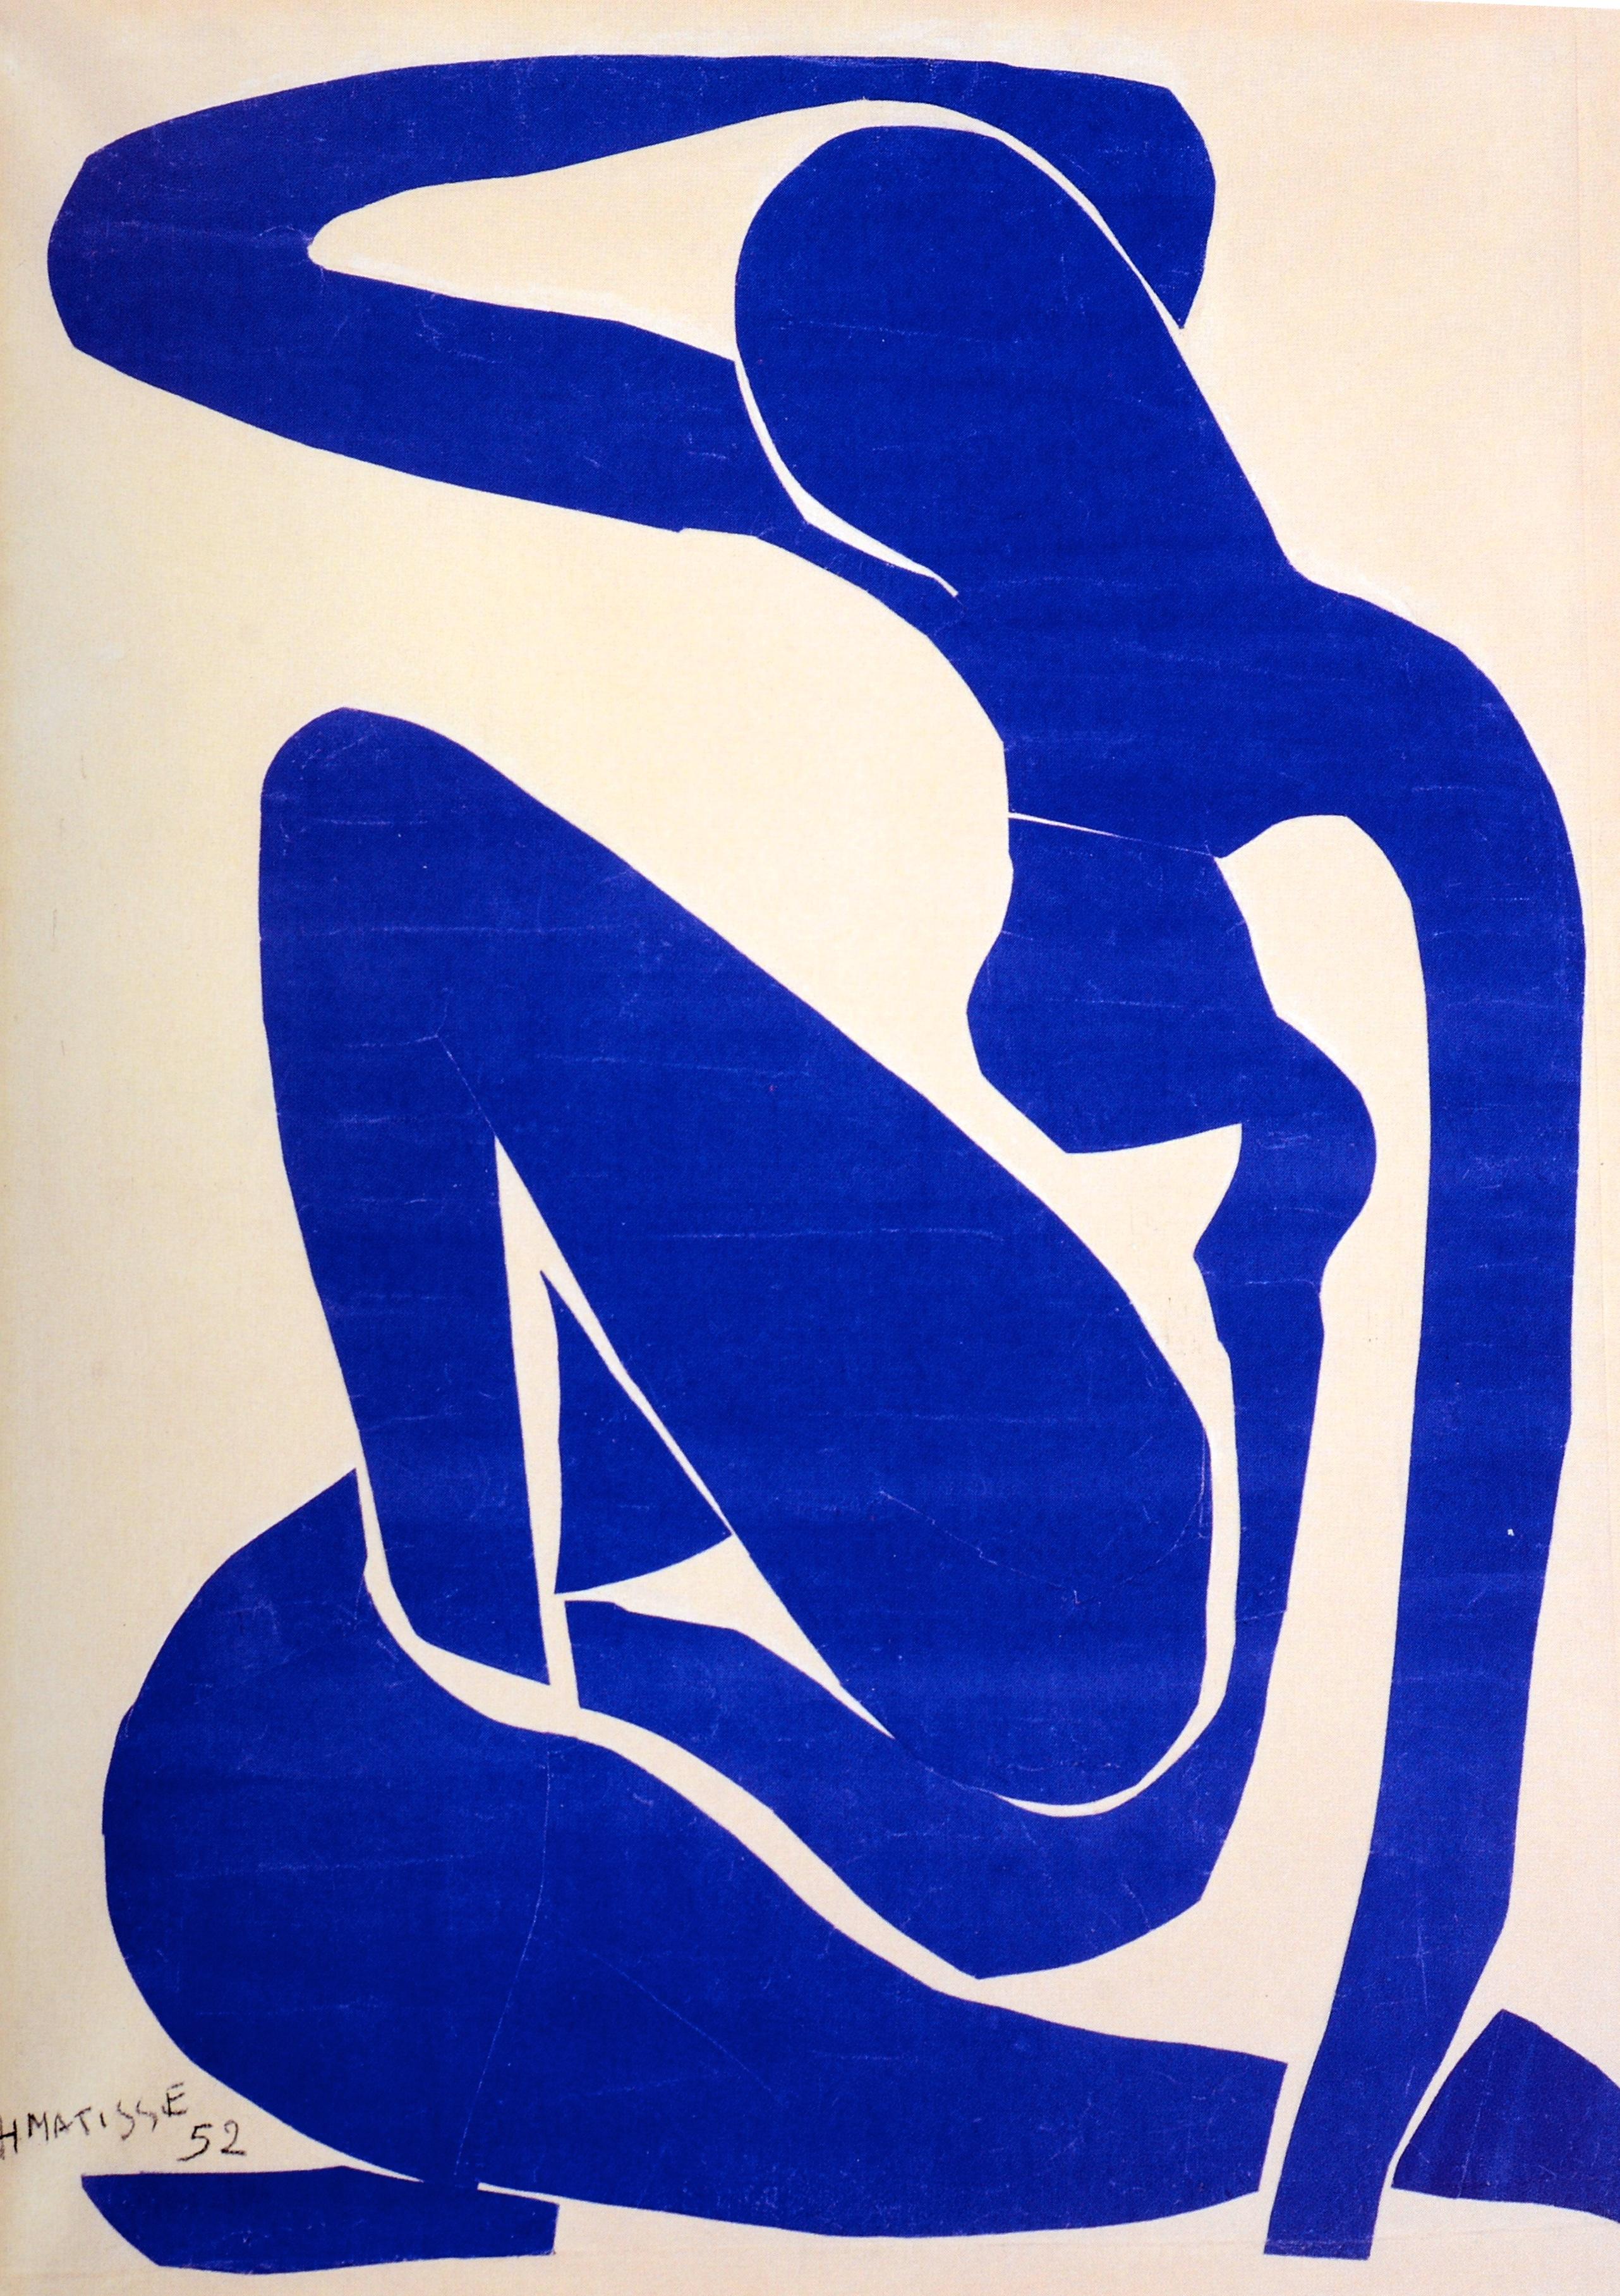 Paper Matisse Picasso, From the Estate of Herbert Kasper, Thank You Letter From MOMA For Sale